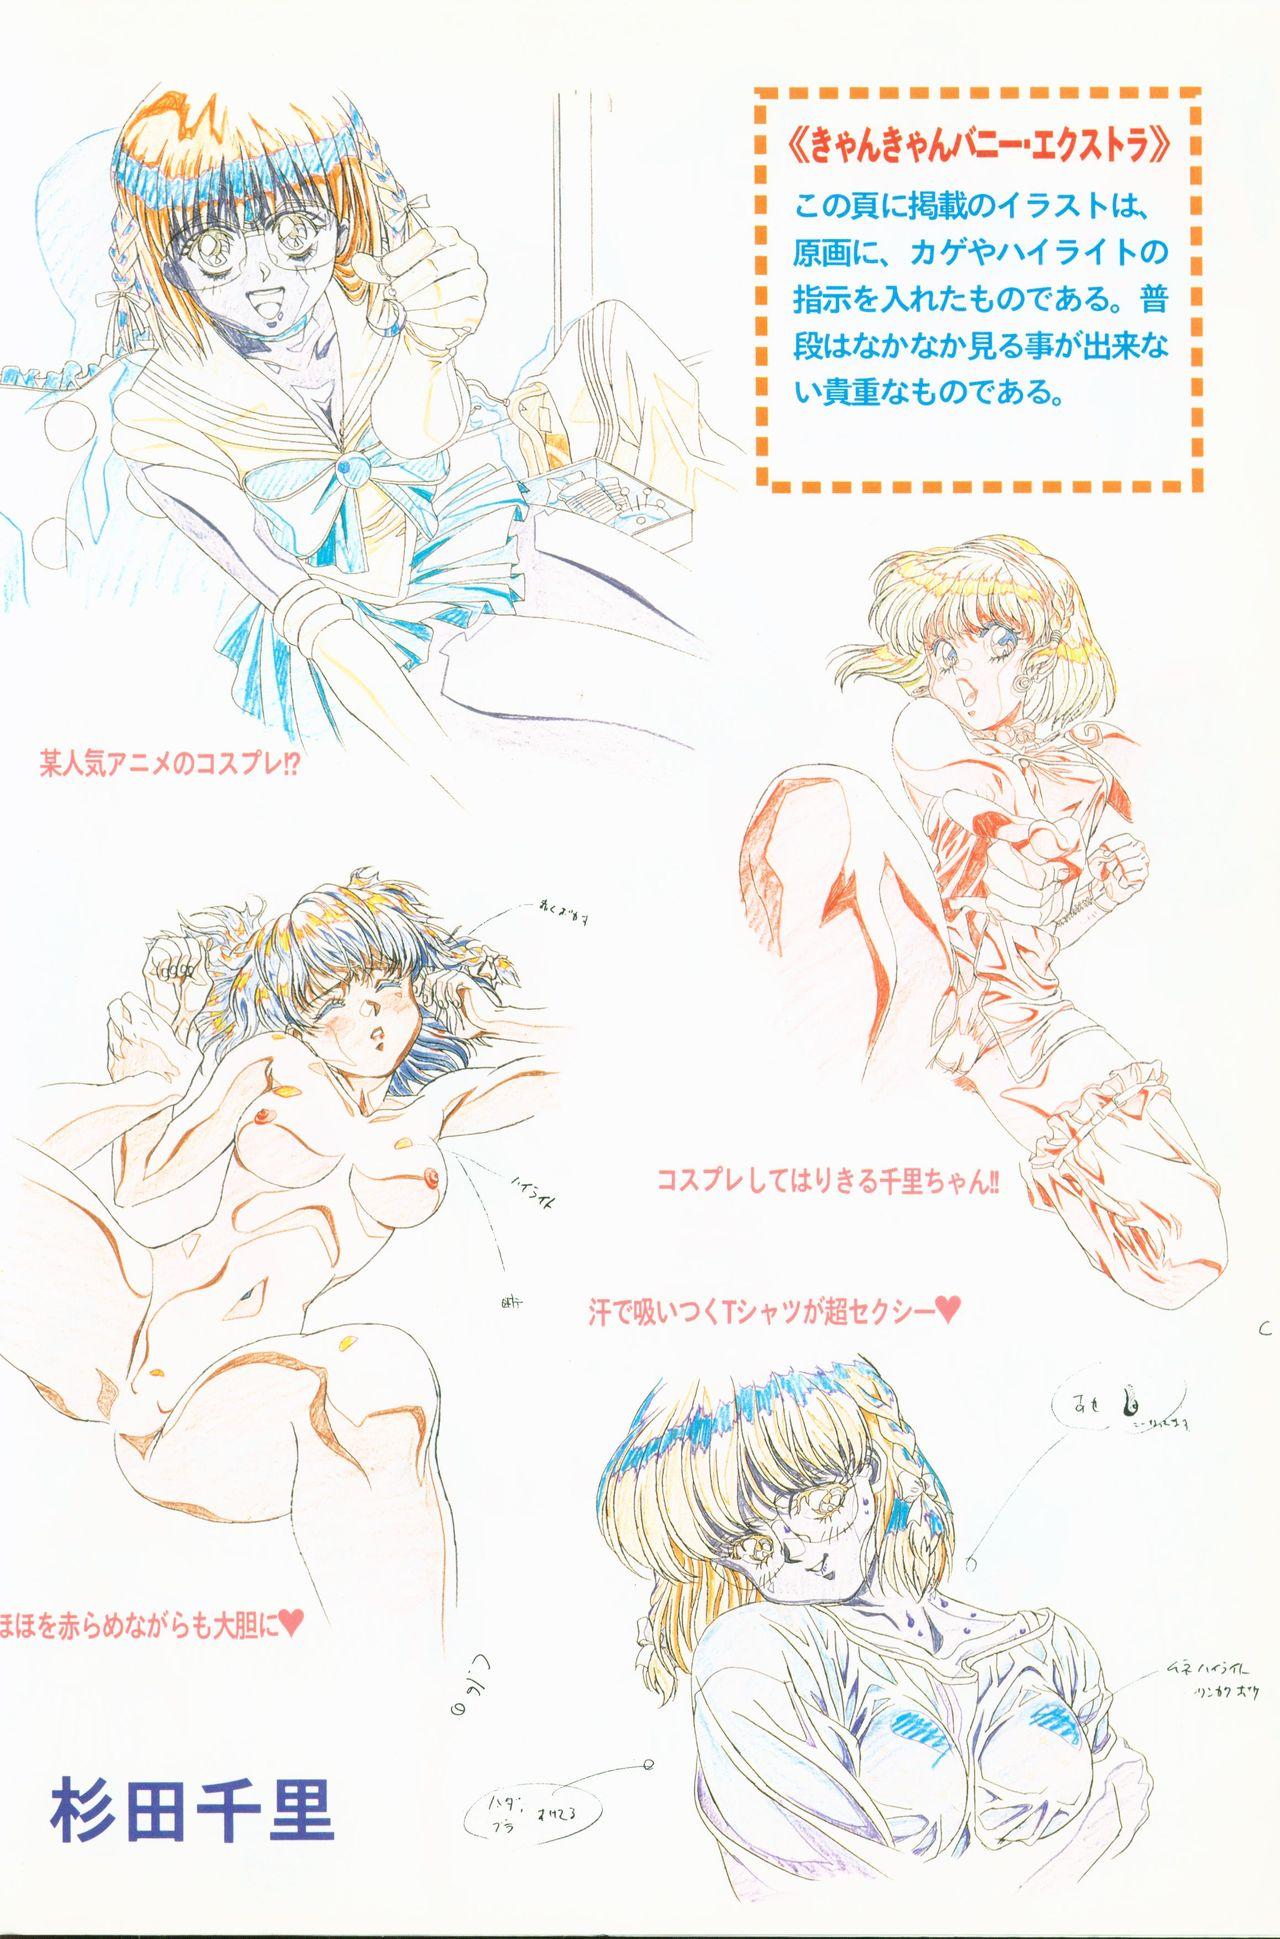 CAN CAN BUNNY OFFICIAL ART BOOK 5